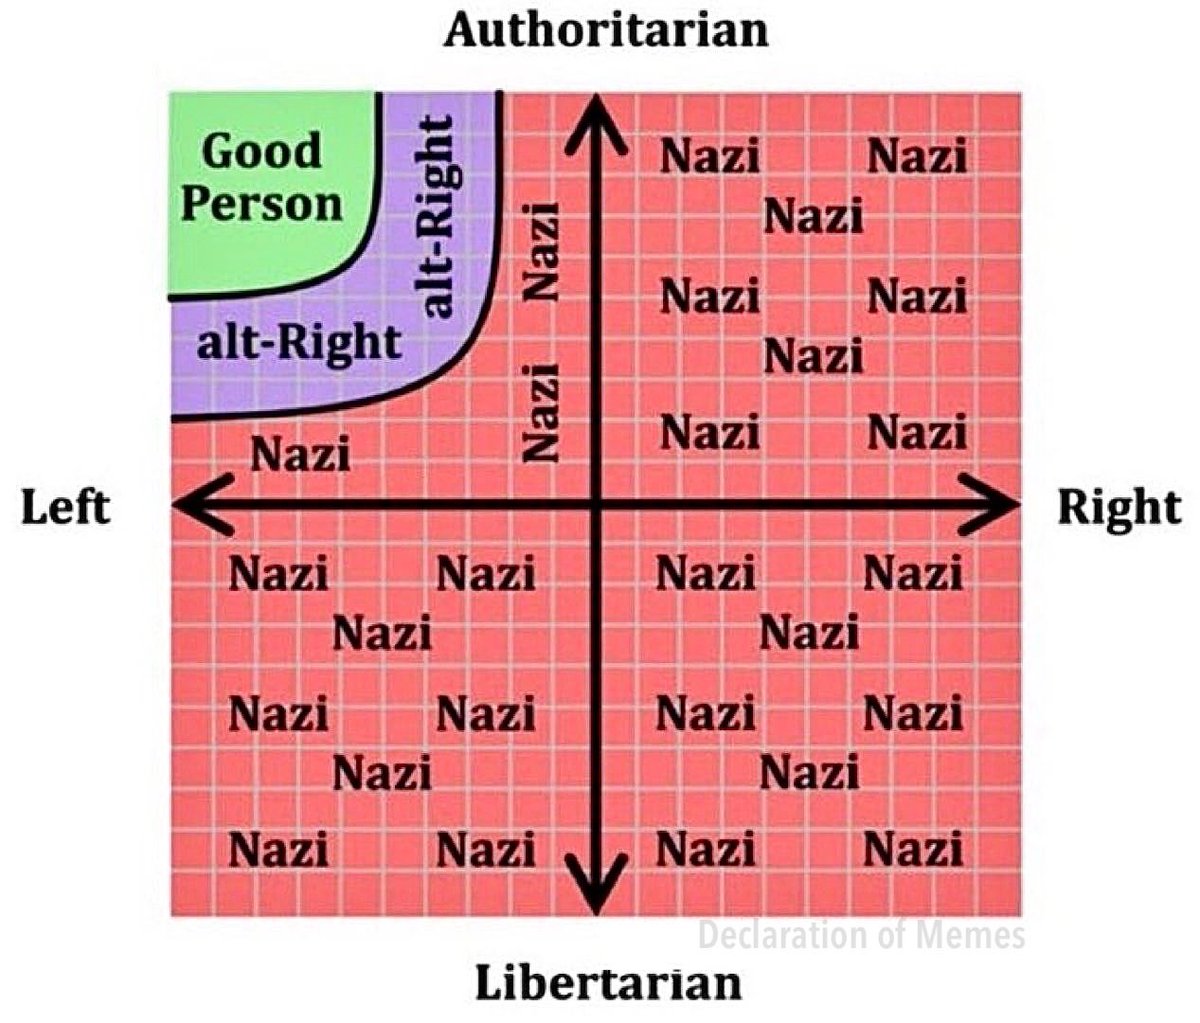 The Political Compass according to Leftists: